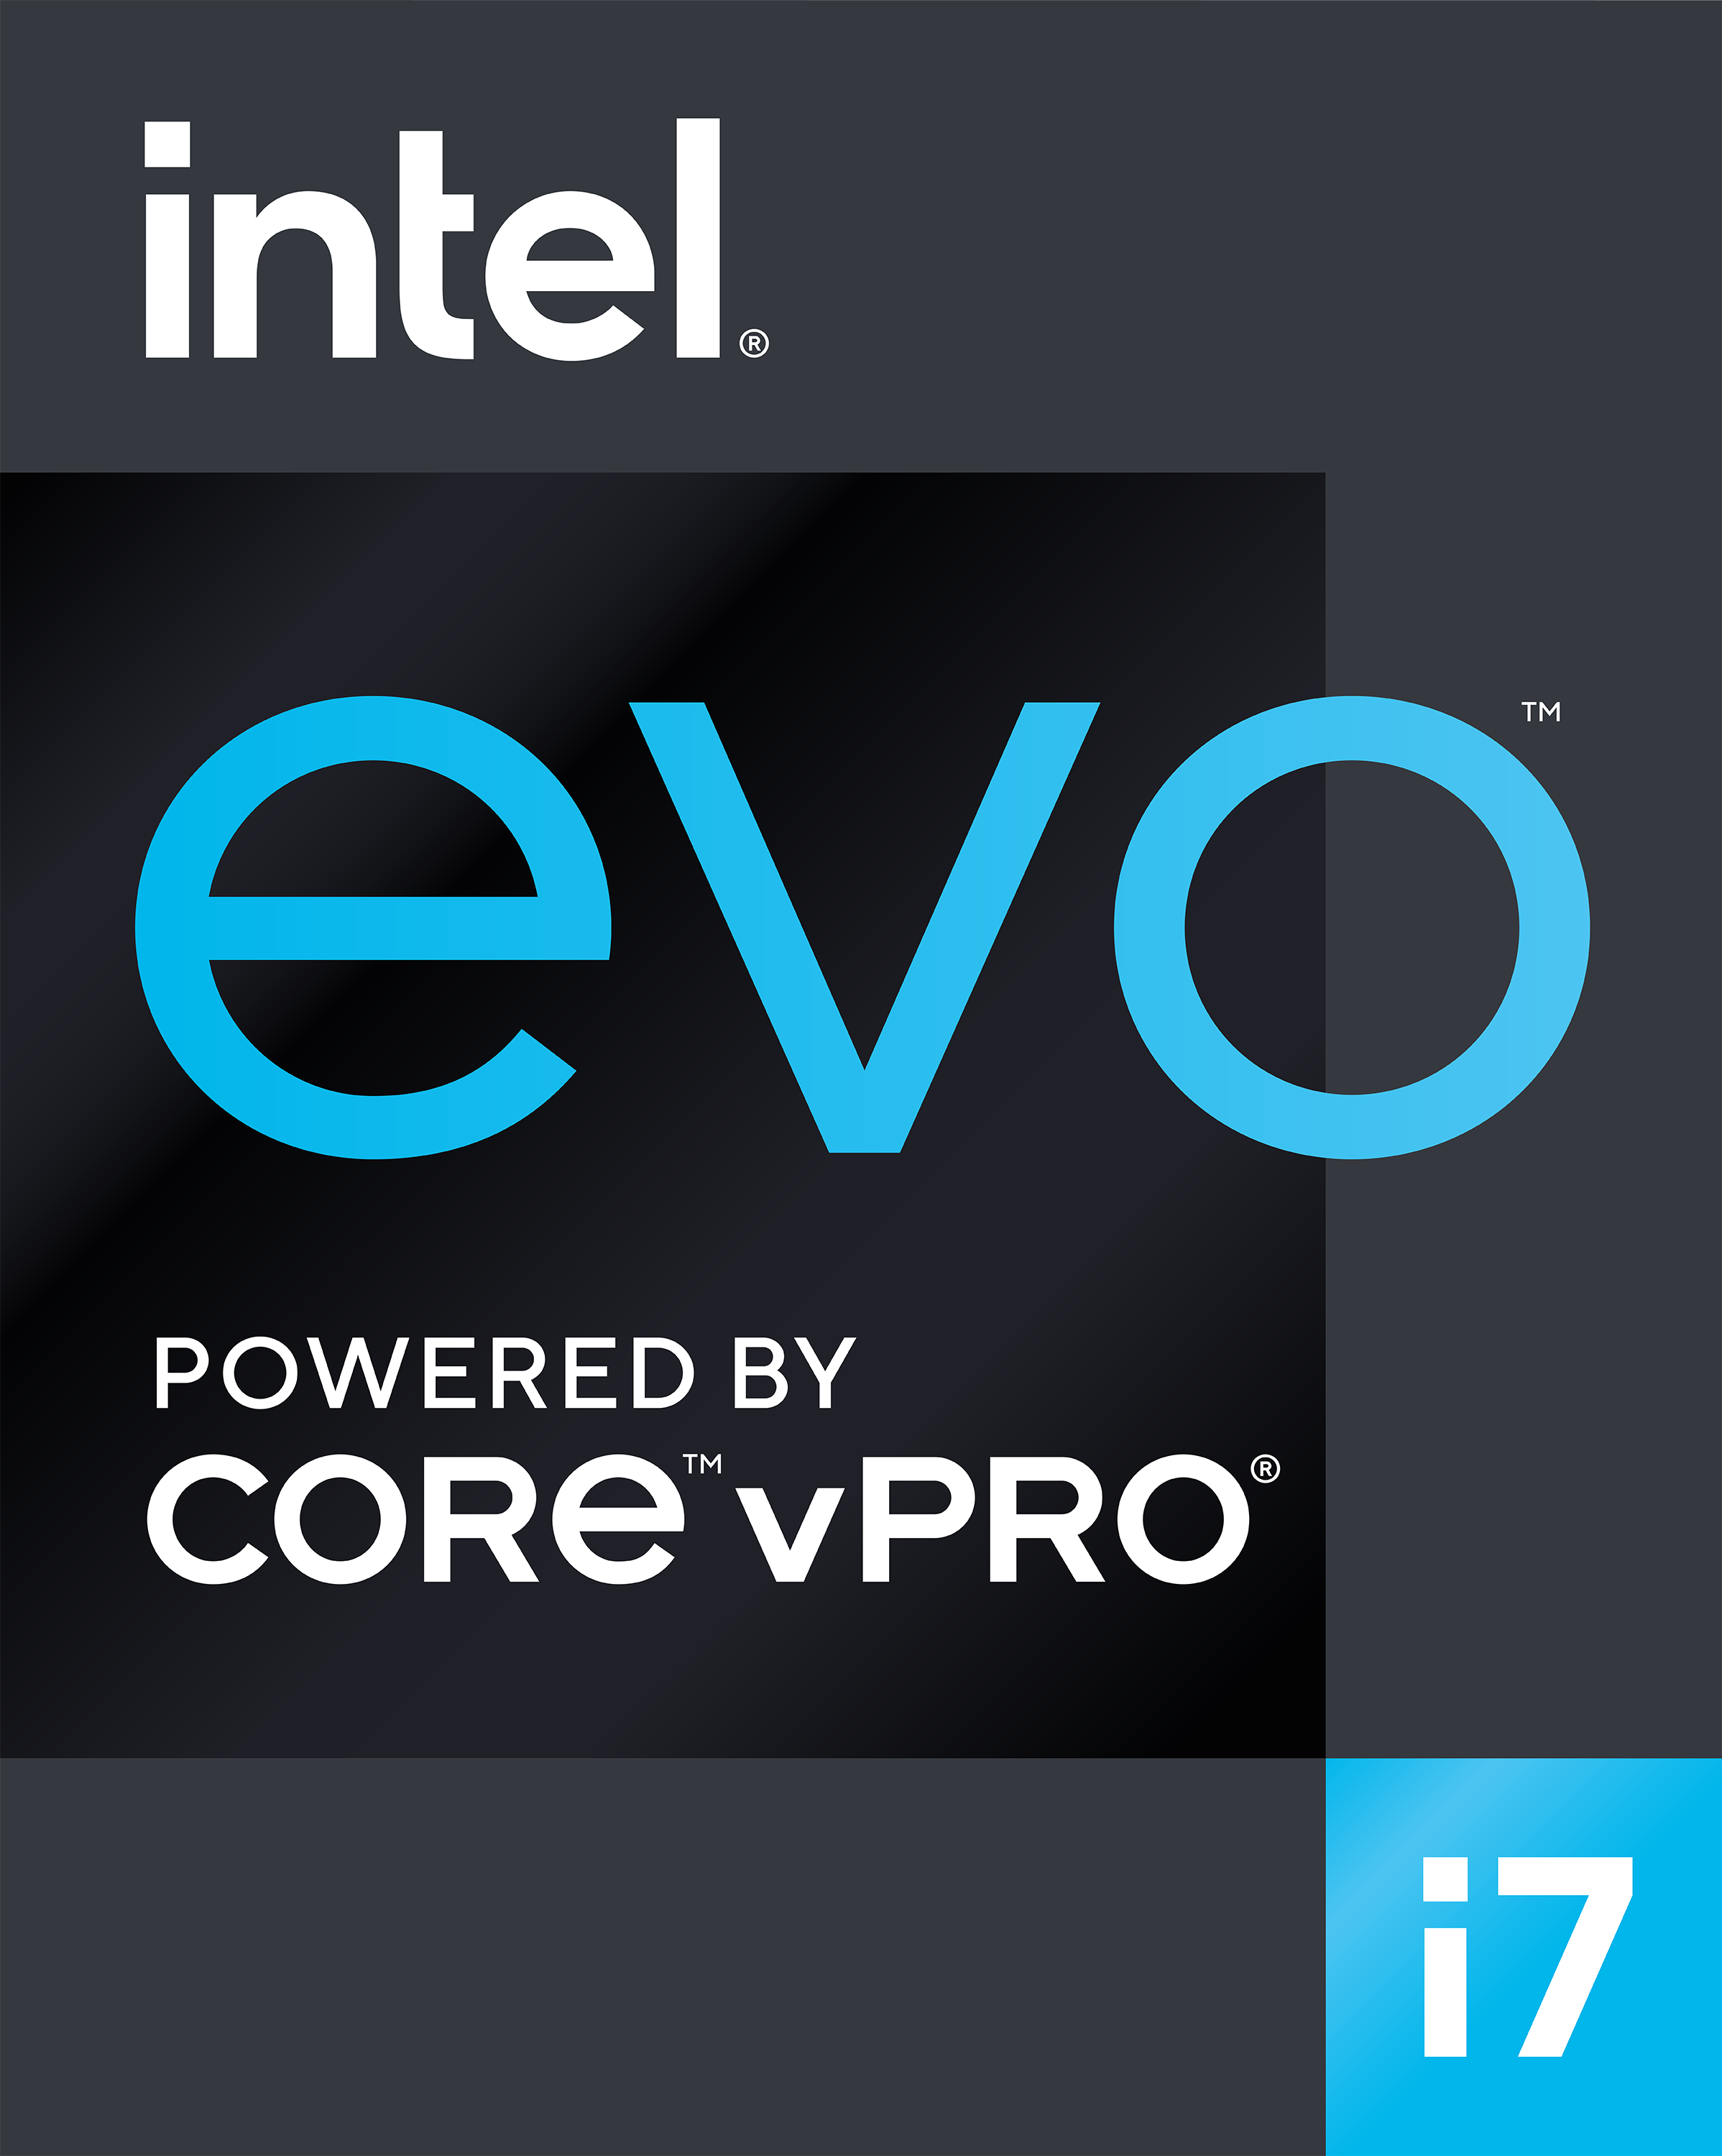 Intel Logo | Why LenovoPRO for Small Business